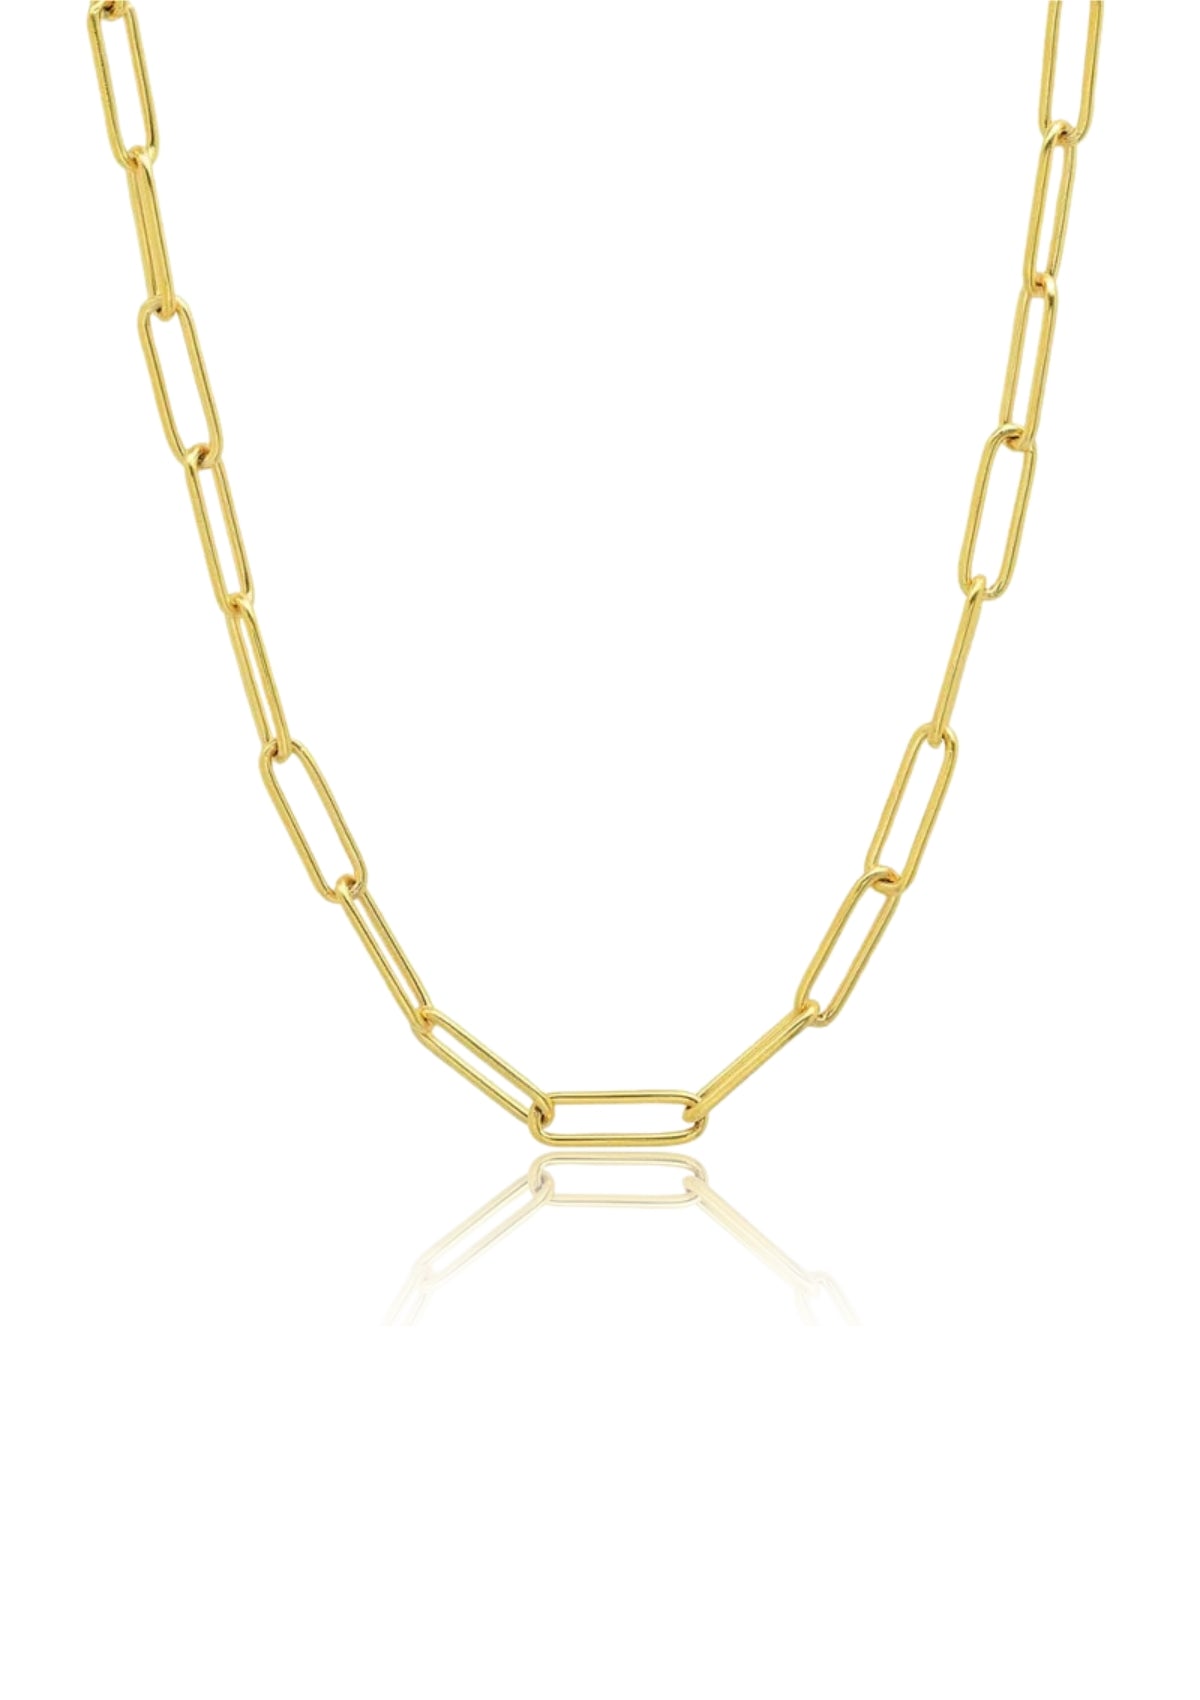 Gold Oval Links Chain Necklace -Tai Rittichai- Ruby Jane-